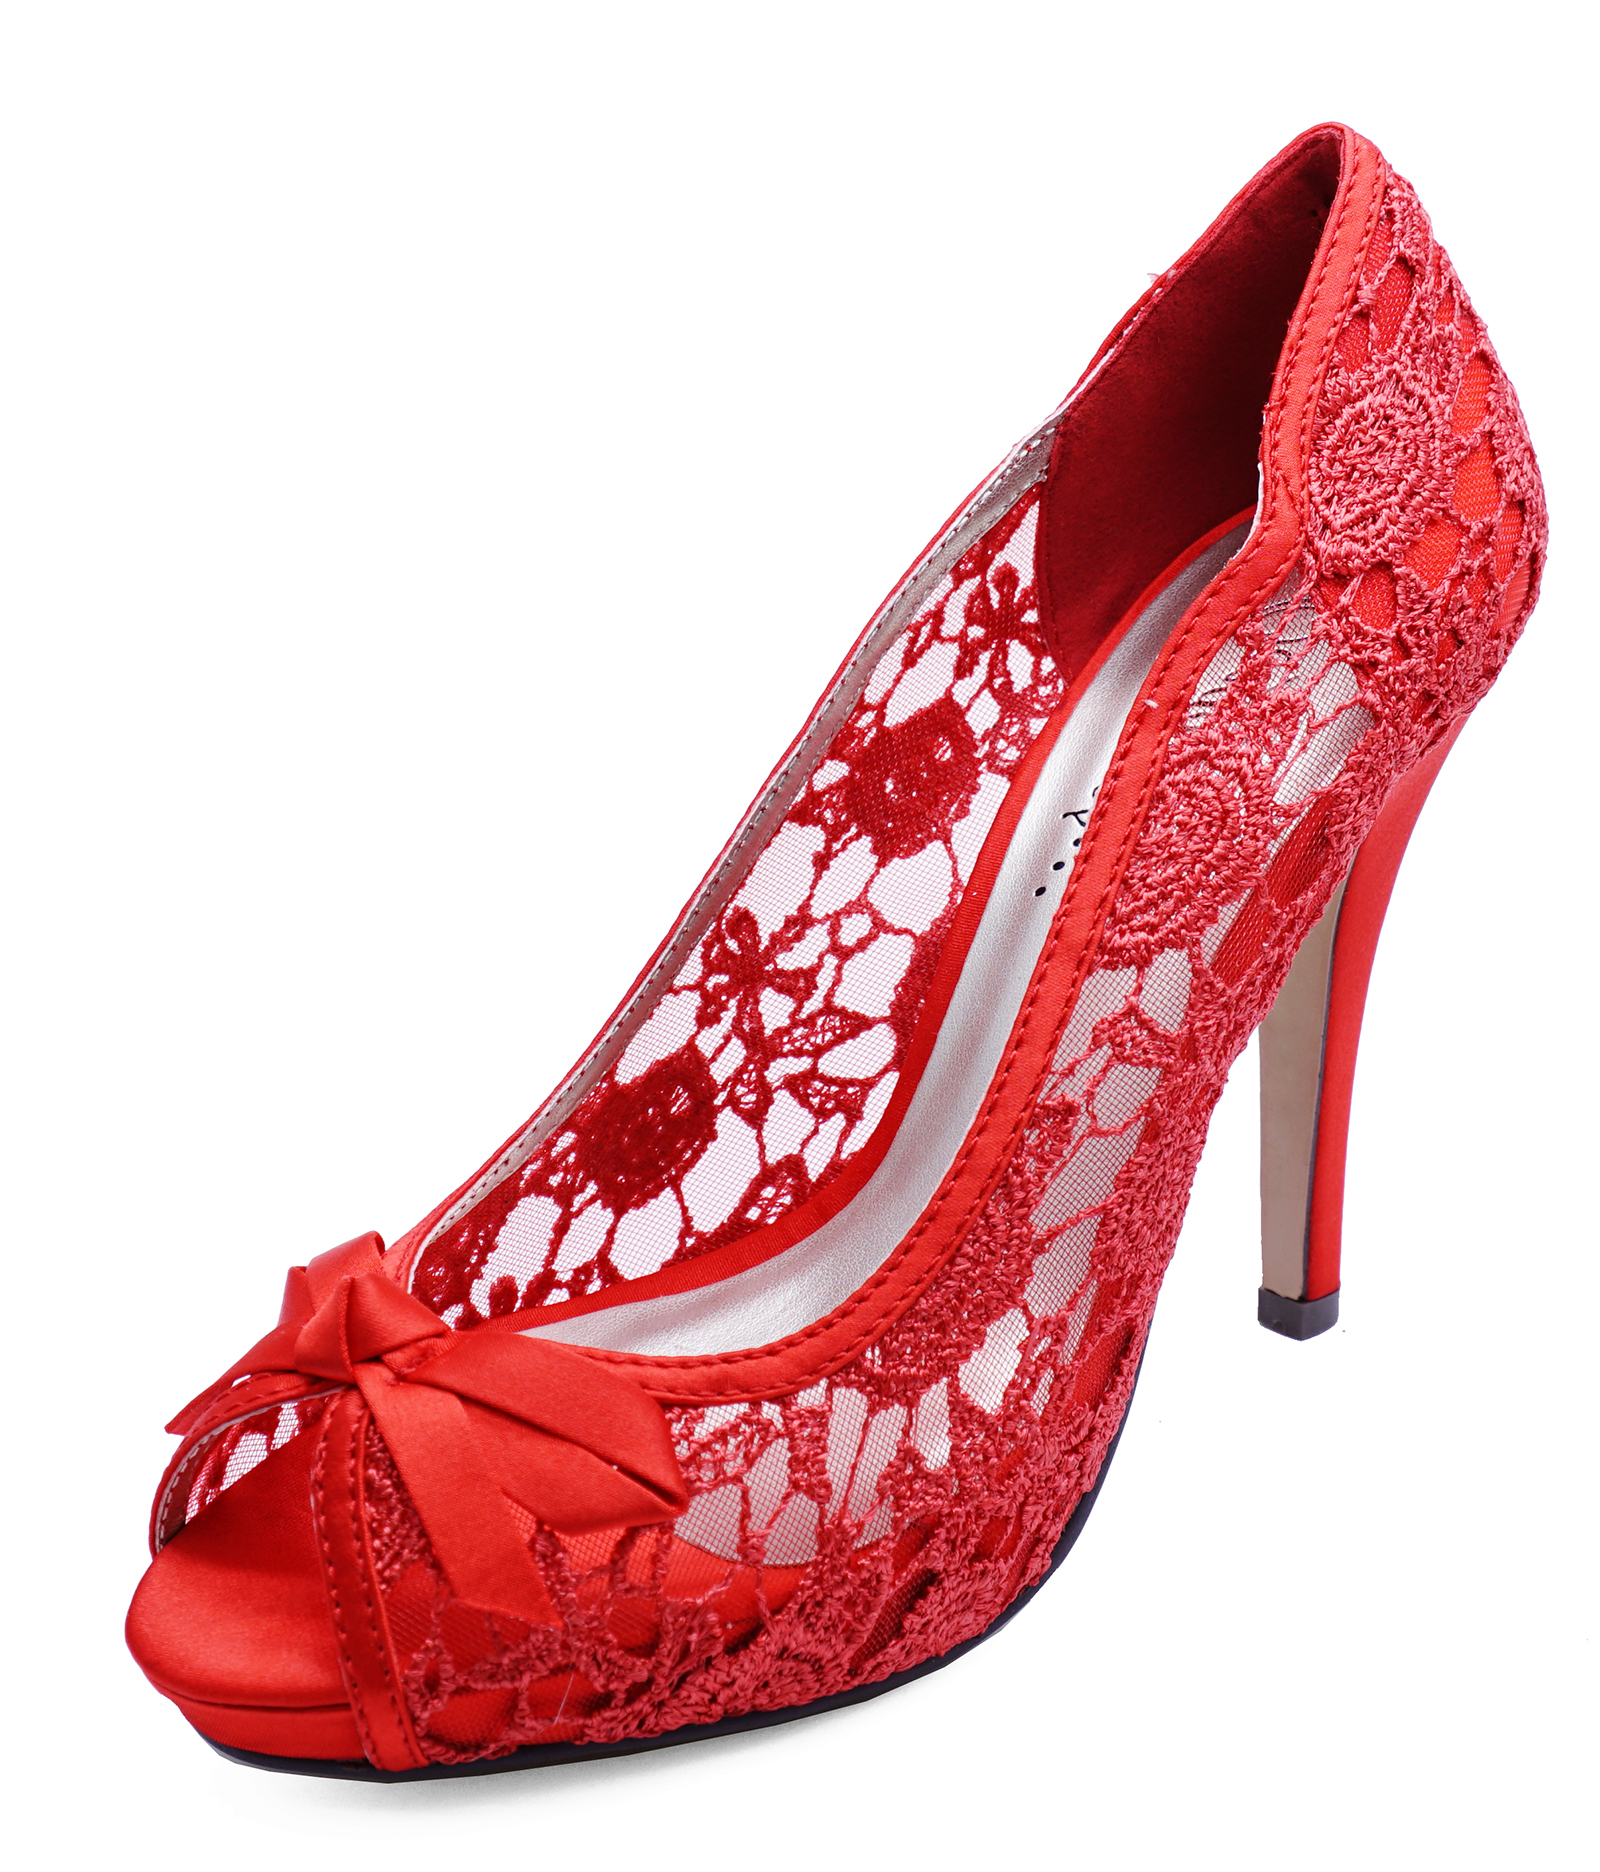 red satin shoes for wedding